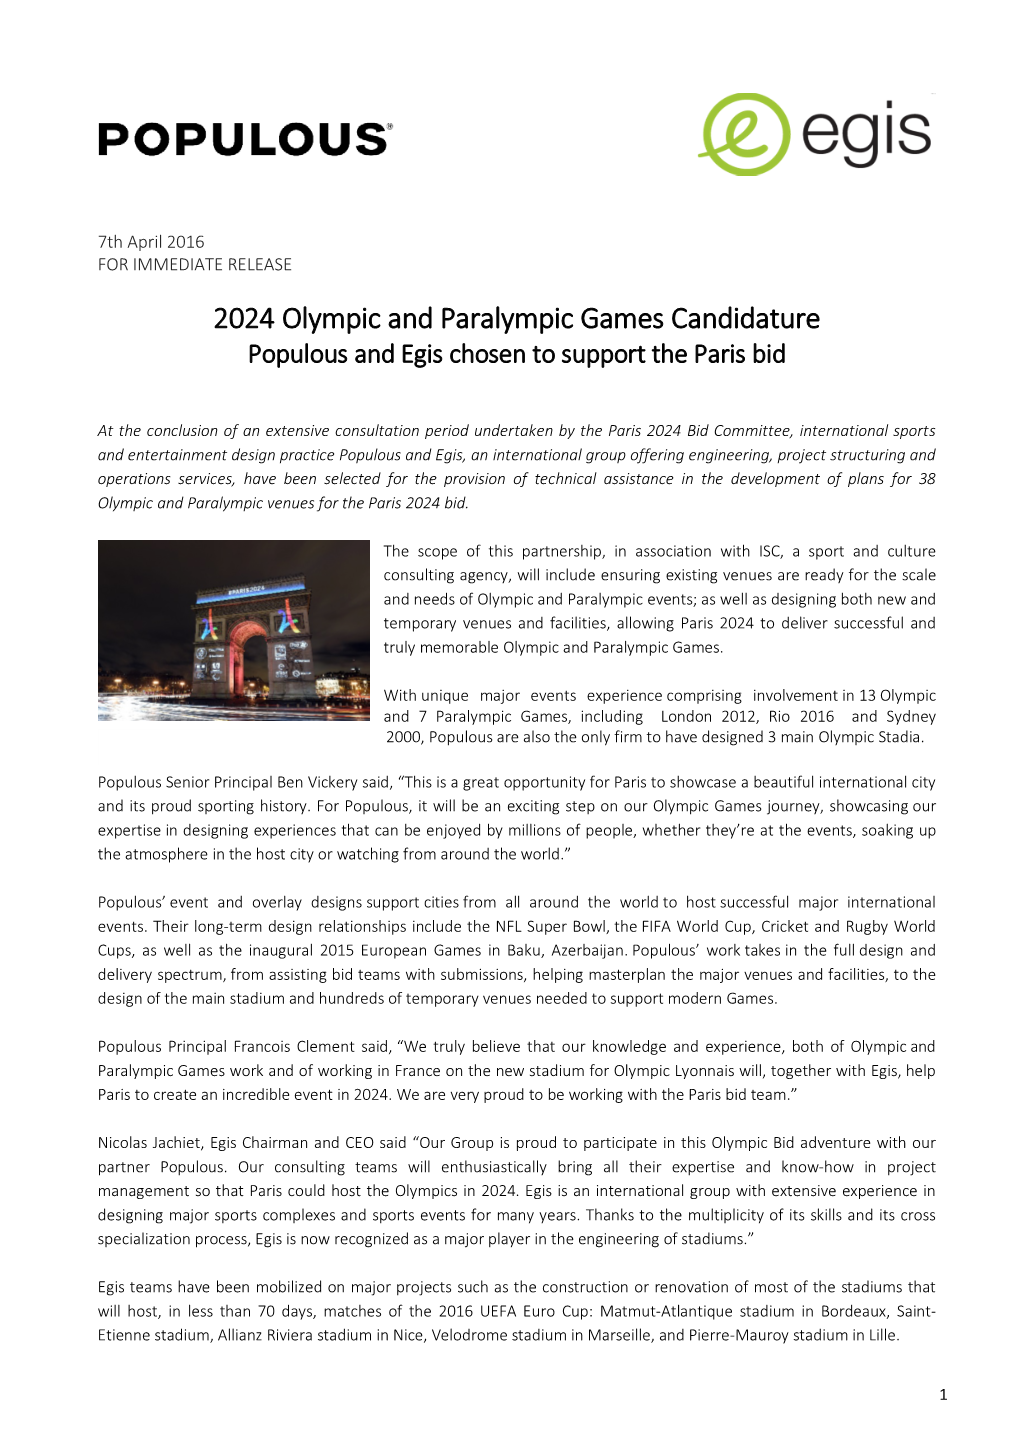 2024 Olympic and Paralympic Games Candidature Populous and Egis Chosen to Support the Paris Bid